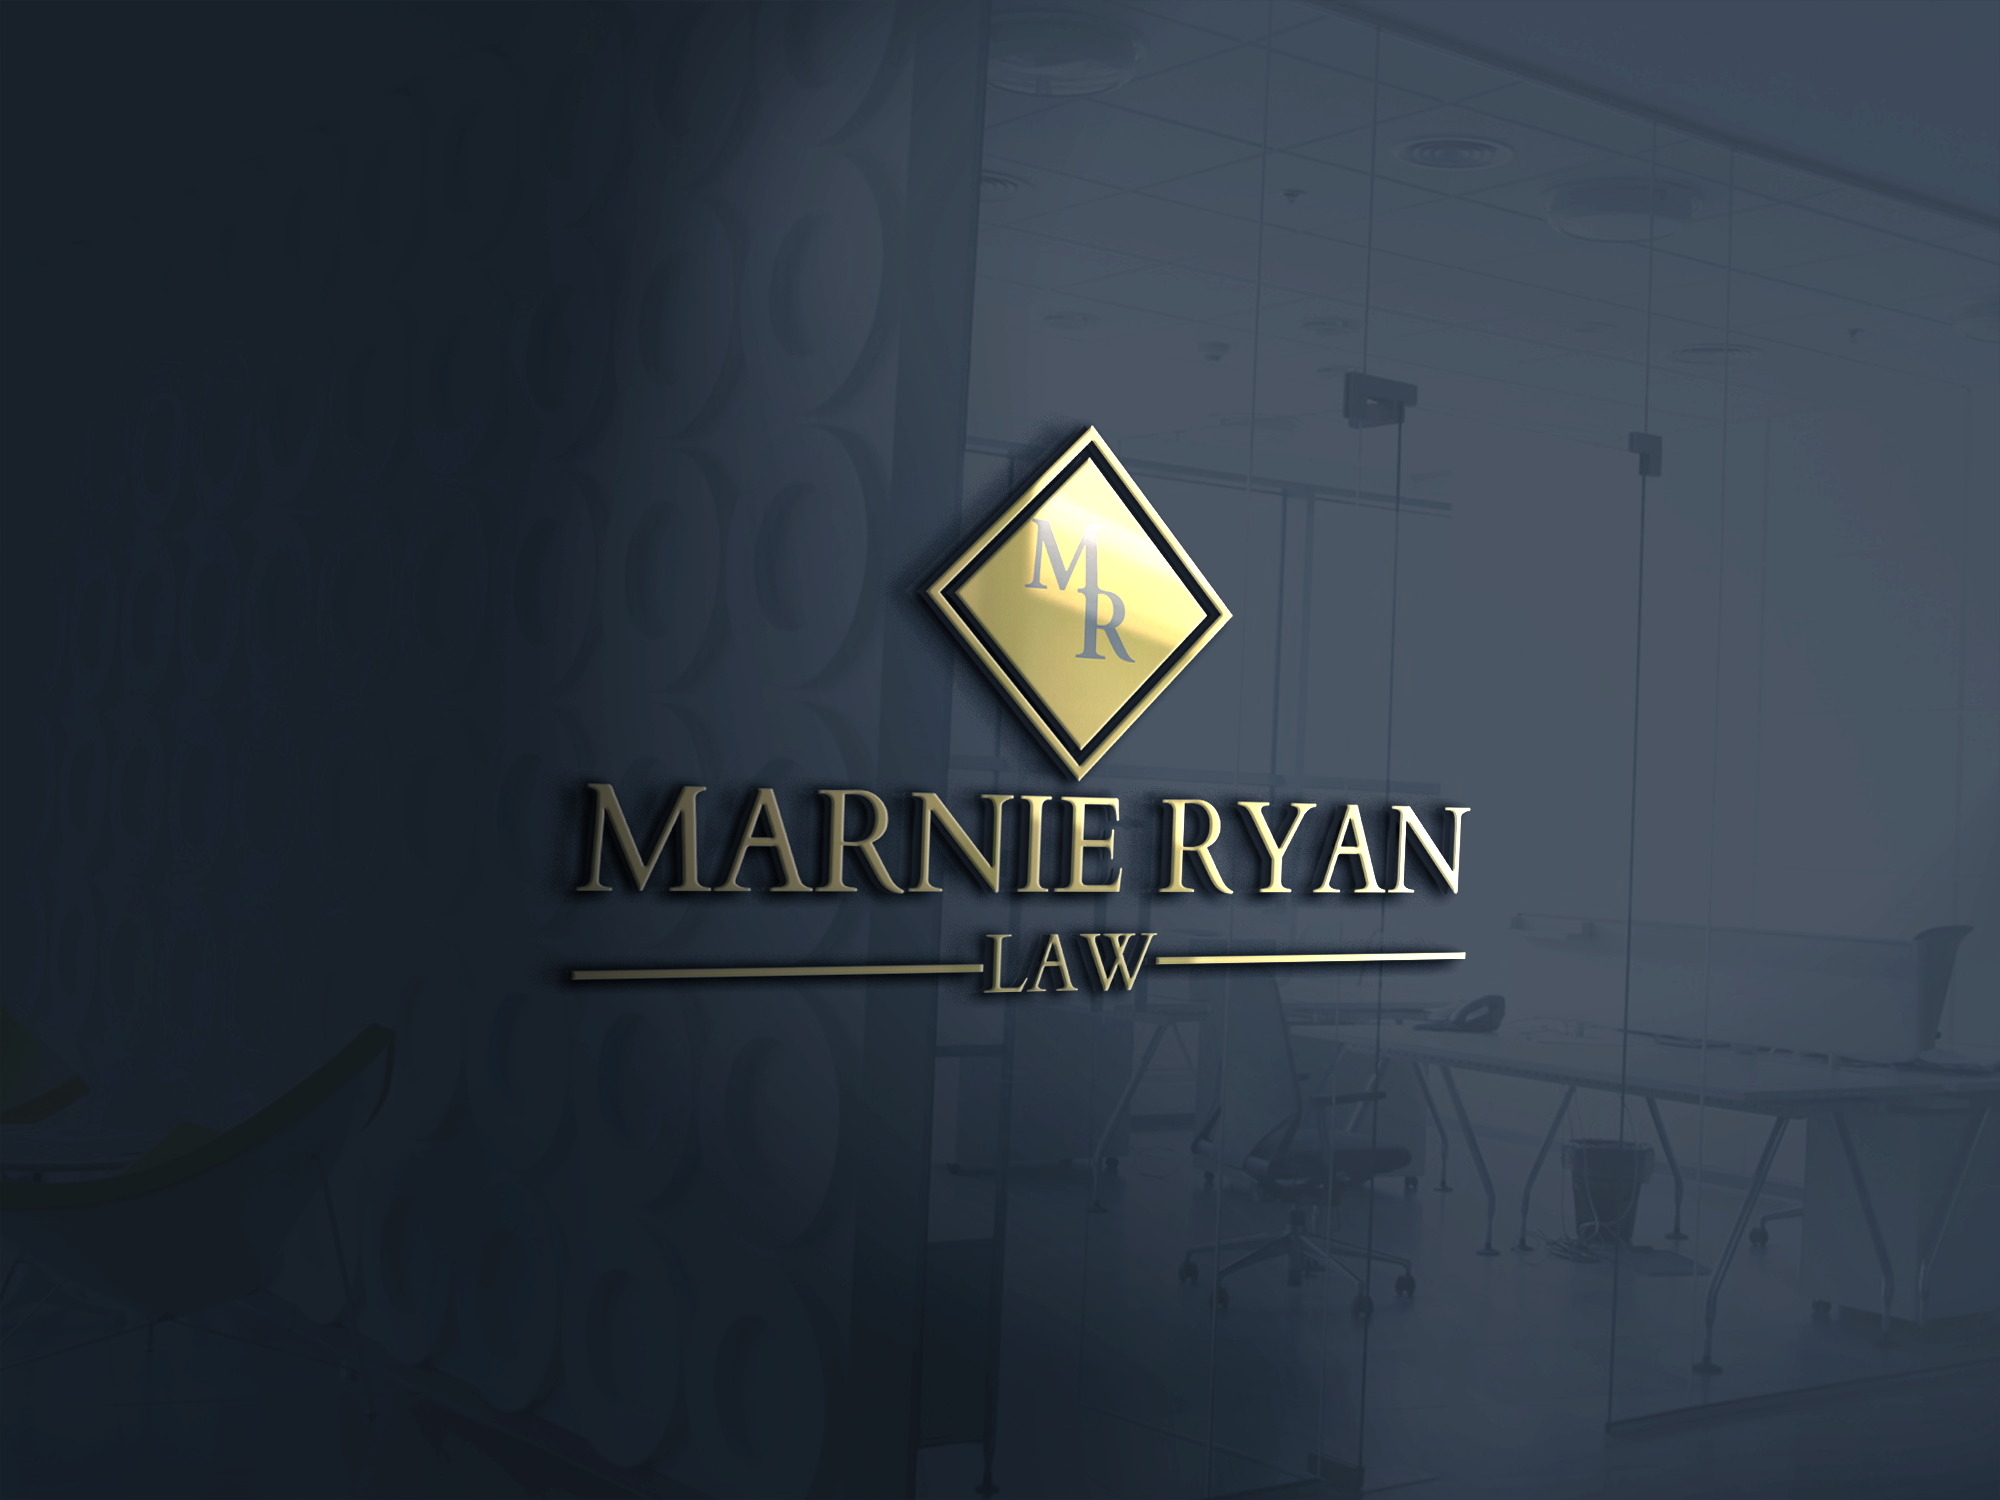 About Marnie Ryan Lawyers